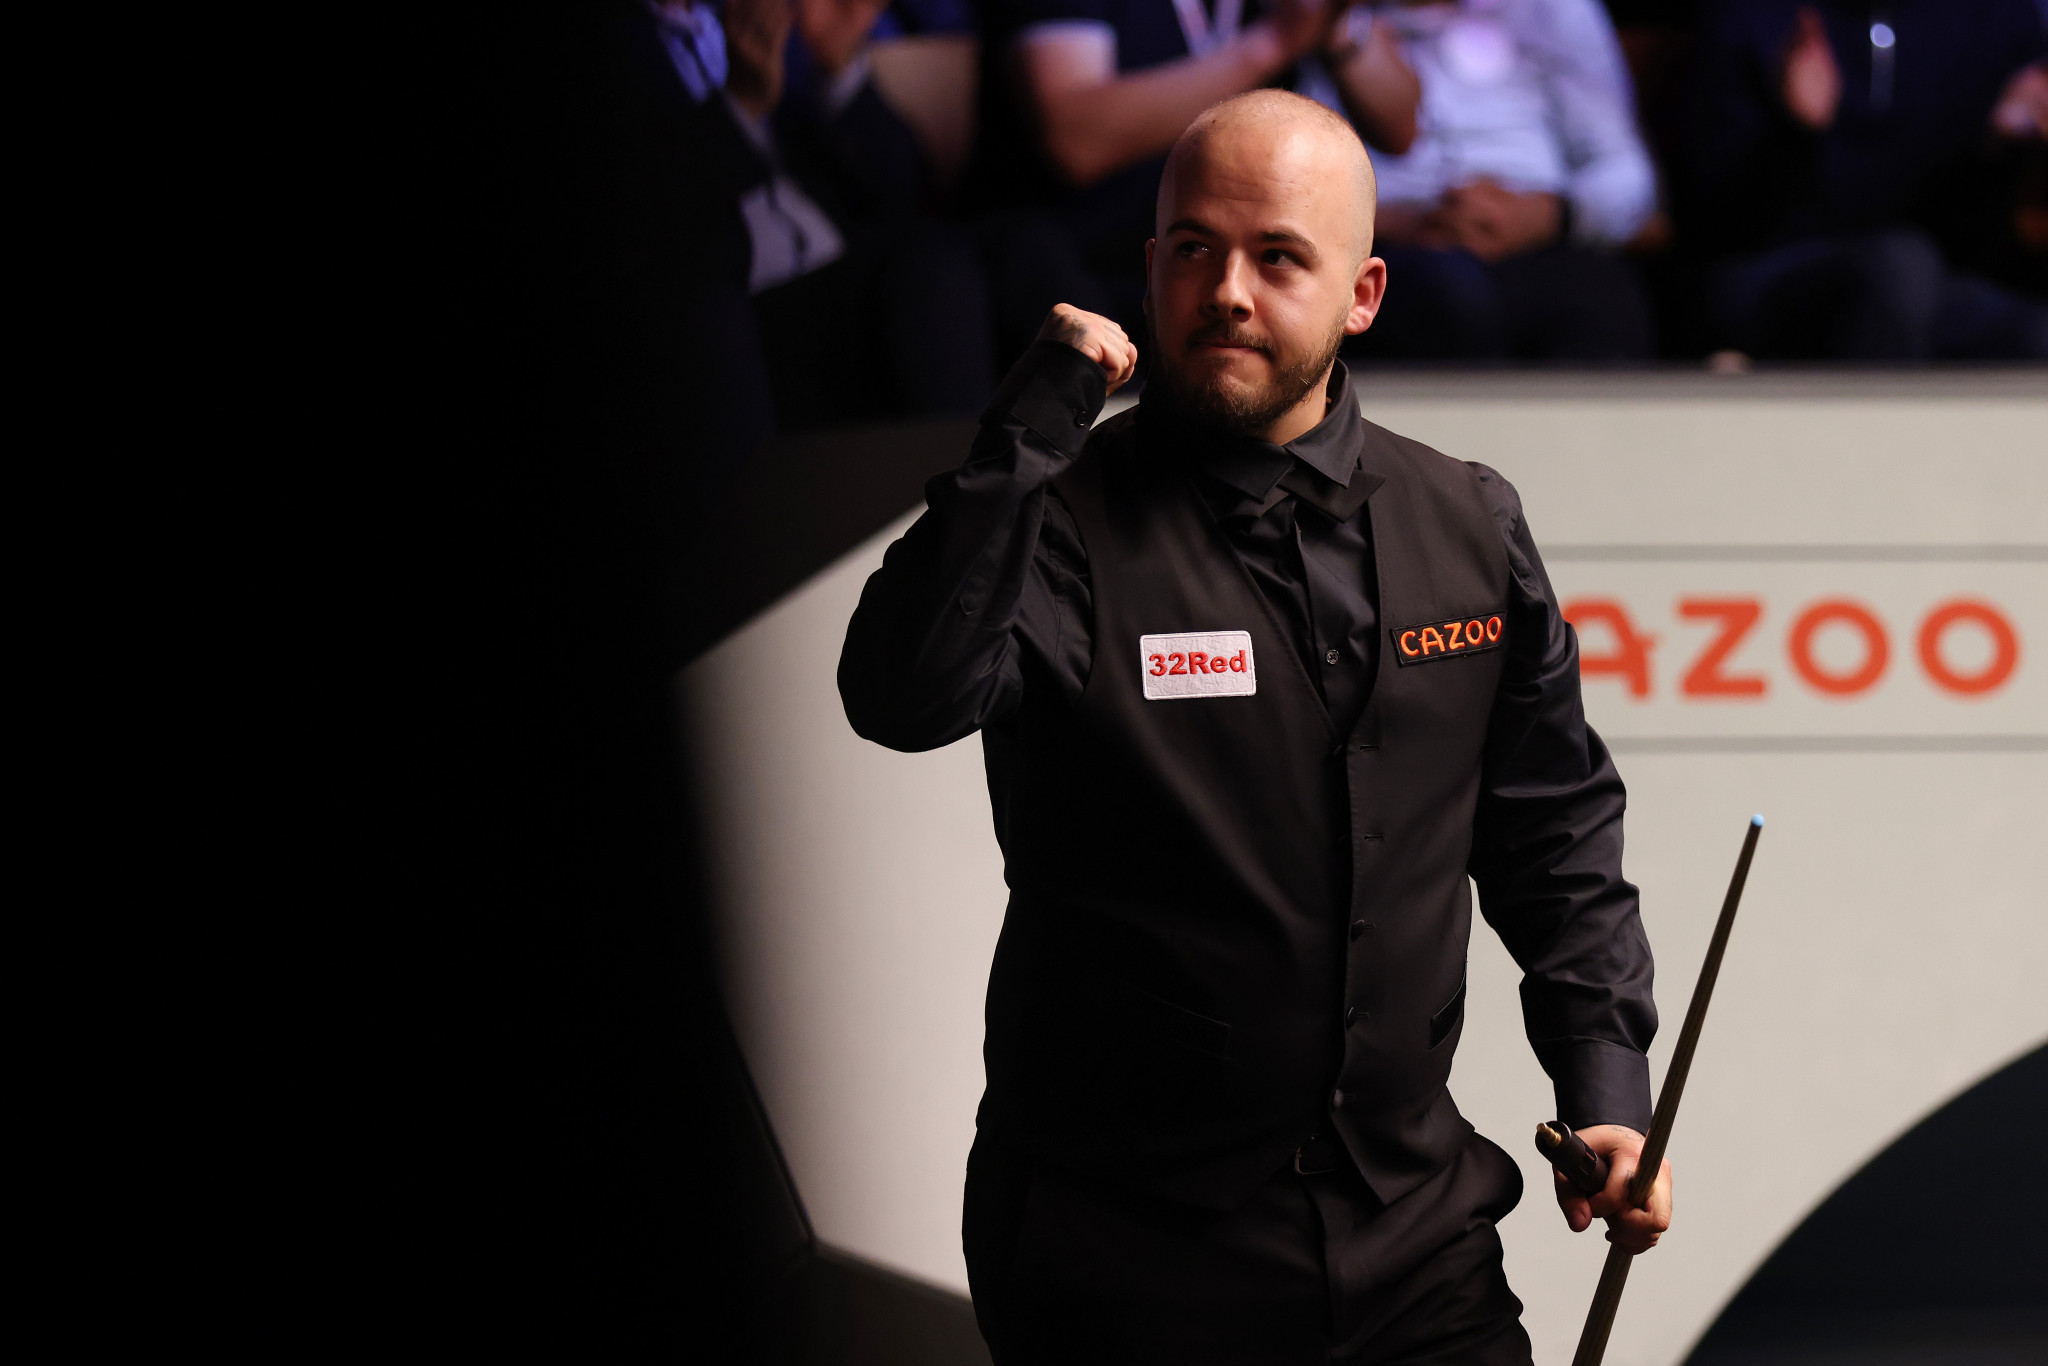 Brecel reaches World Snooker Championship final with incredible comeback over Si